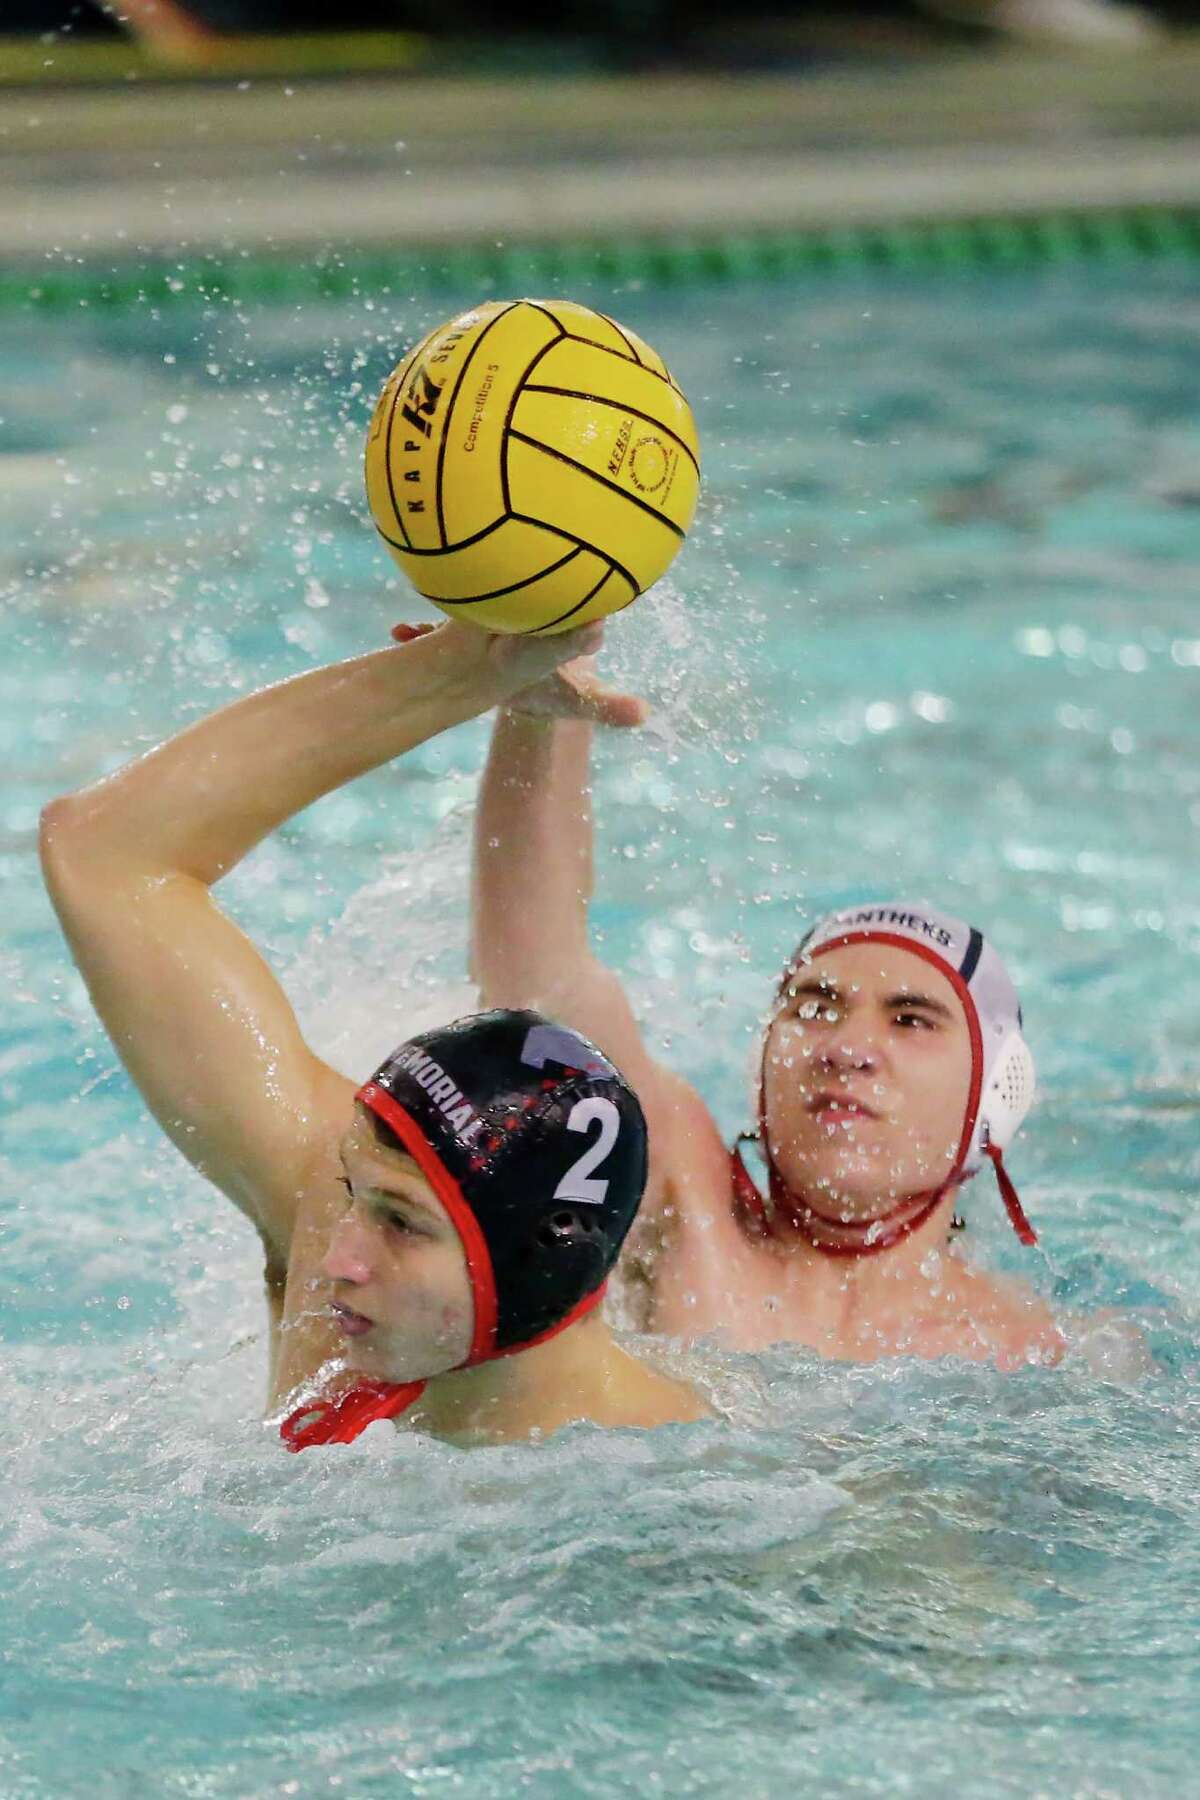 Memorial’s Romain Joubert (2) attempts to pass the ball as Cy-Springs’ Logan Drury, right, reaches in to break up the play during their Region II-Conference 6A Bi-District State waterpolo playoff match, held at the Spring Branch ISD Natatorium Tuesday, Oct. 11, 2022 in Houston, TX.